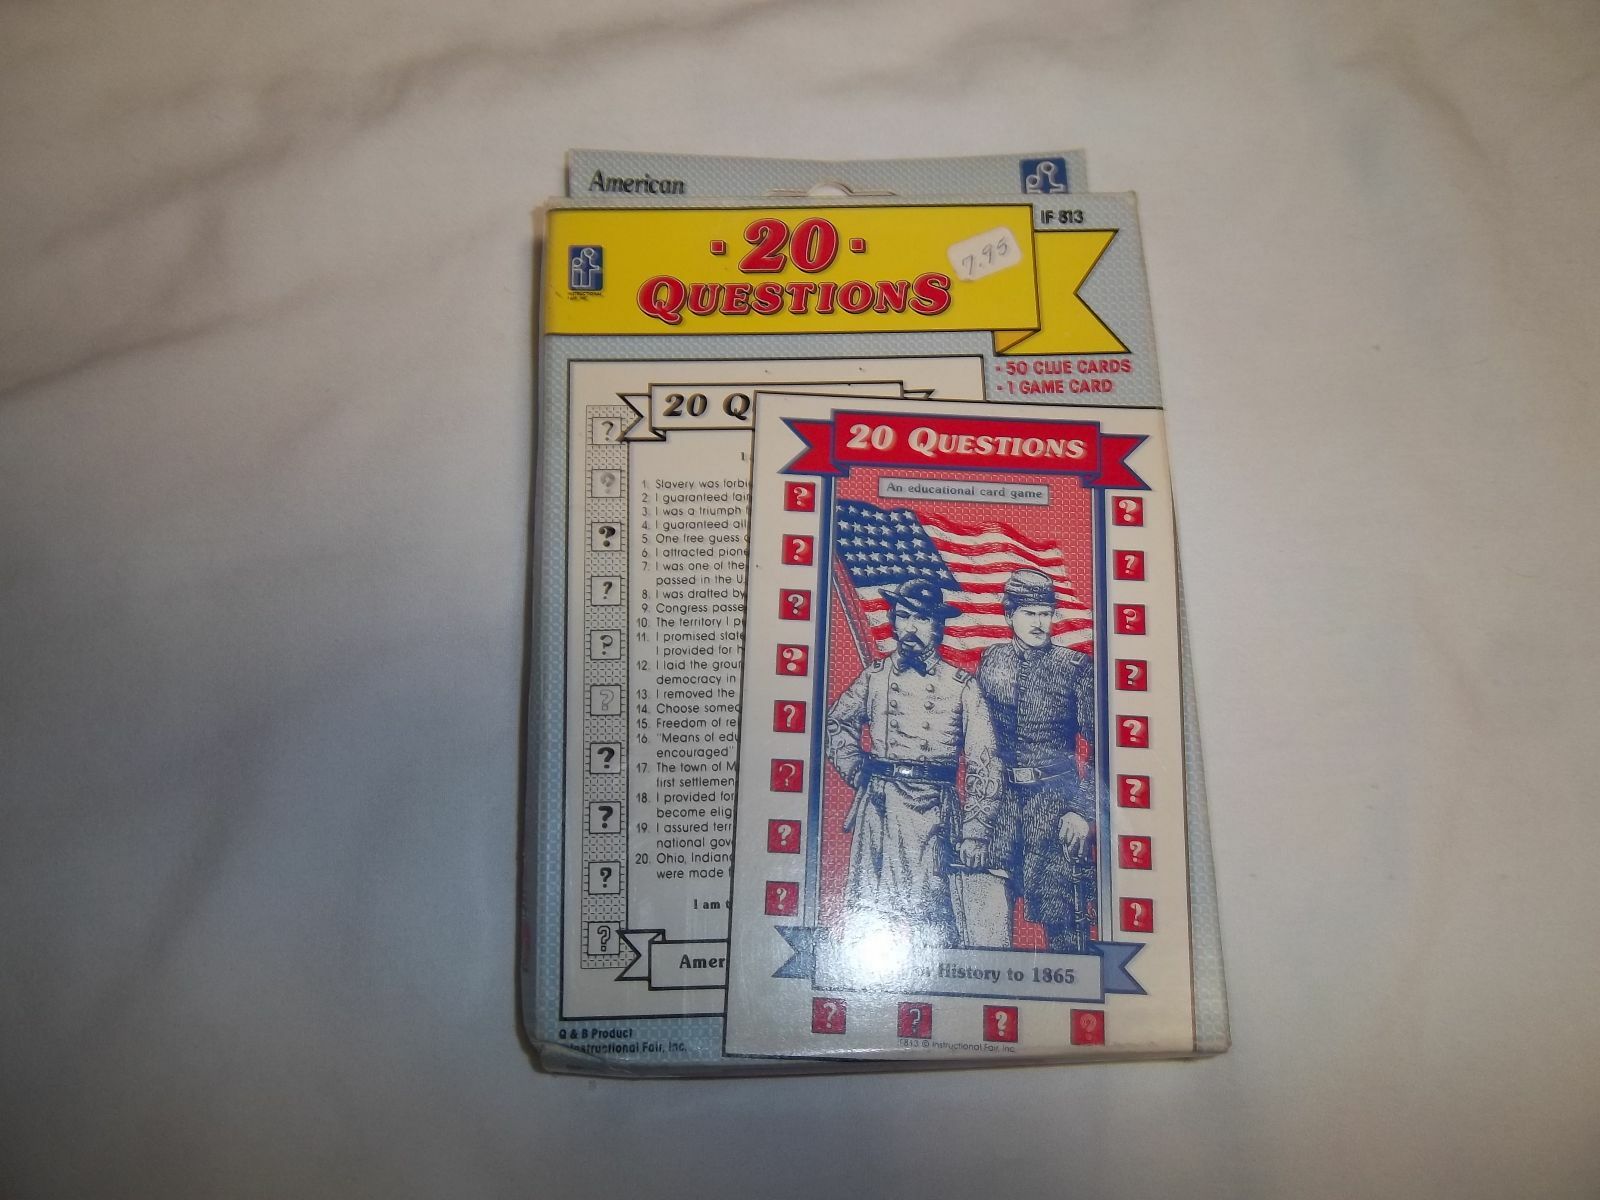 IF813 20 QUESTIONS AMERICAN HISTORY TO 1865  GAME CARDS  GRADES 5-8